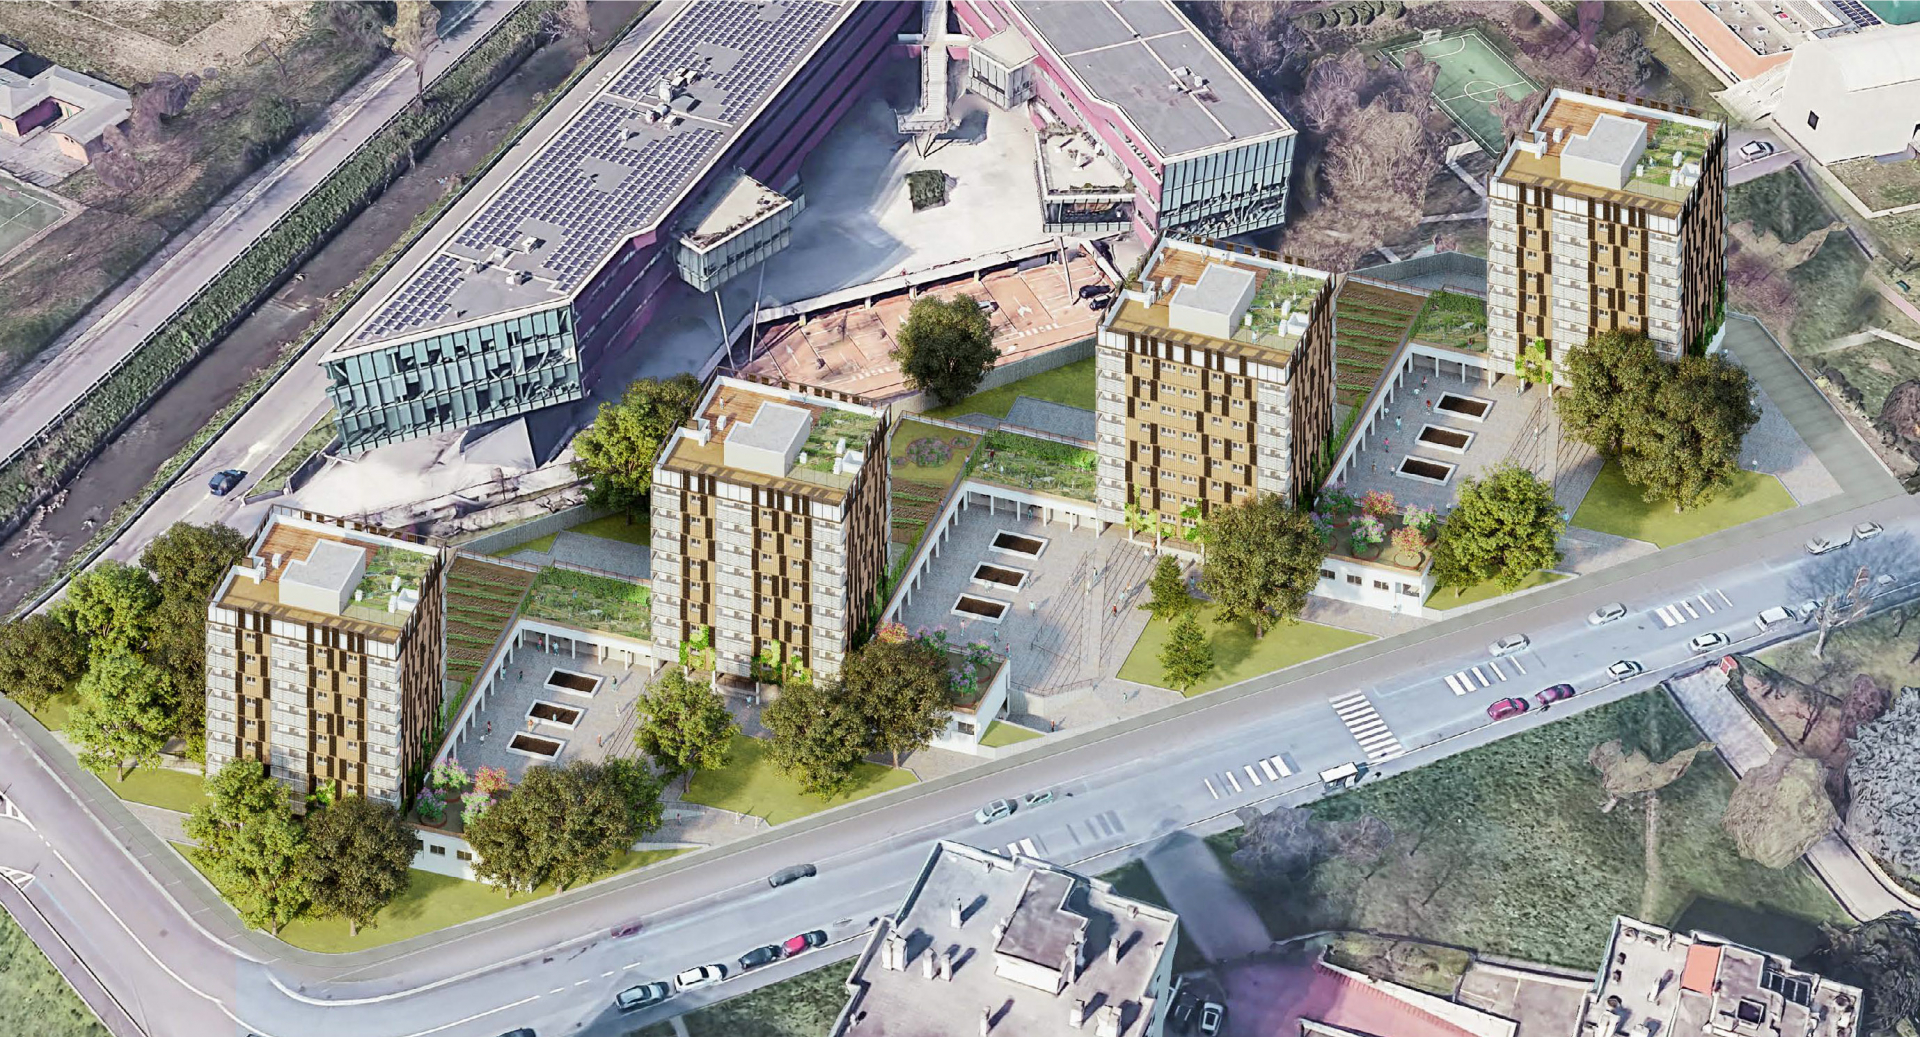 How can green roofs be economically sustainable? The example of Milan's social housing complex in Via Russoli